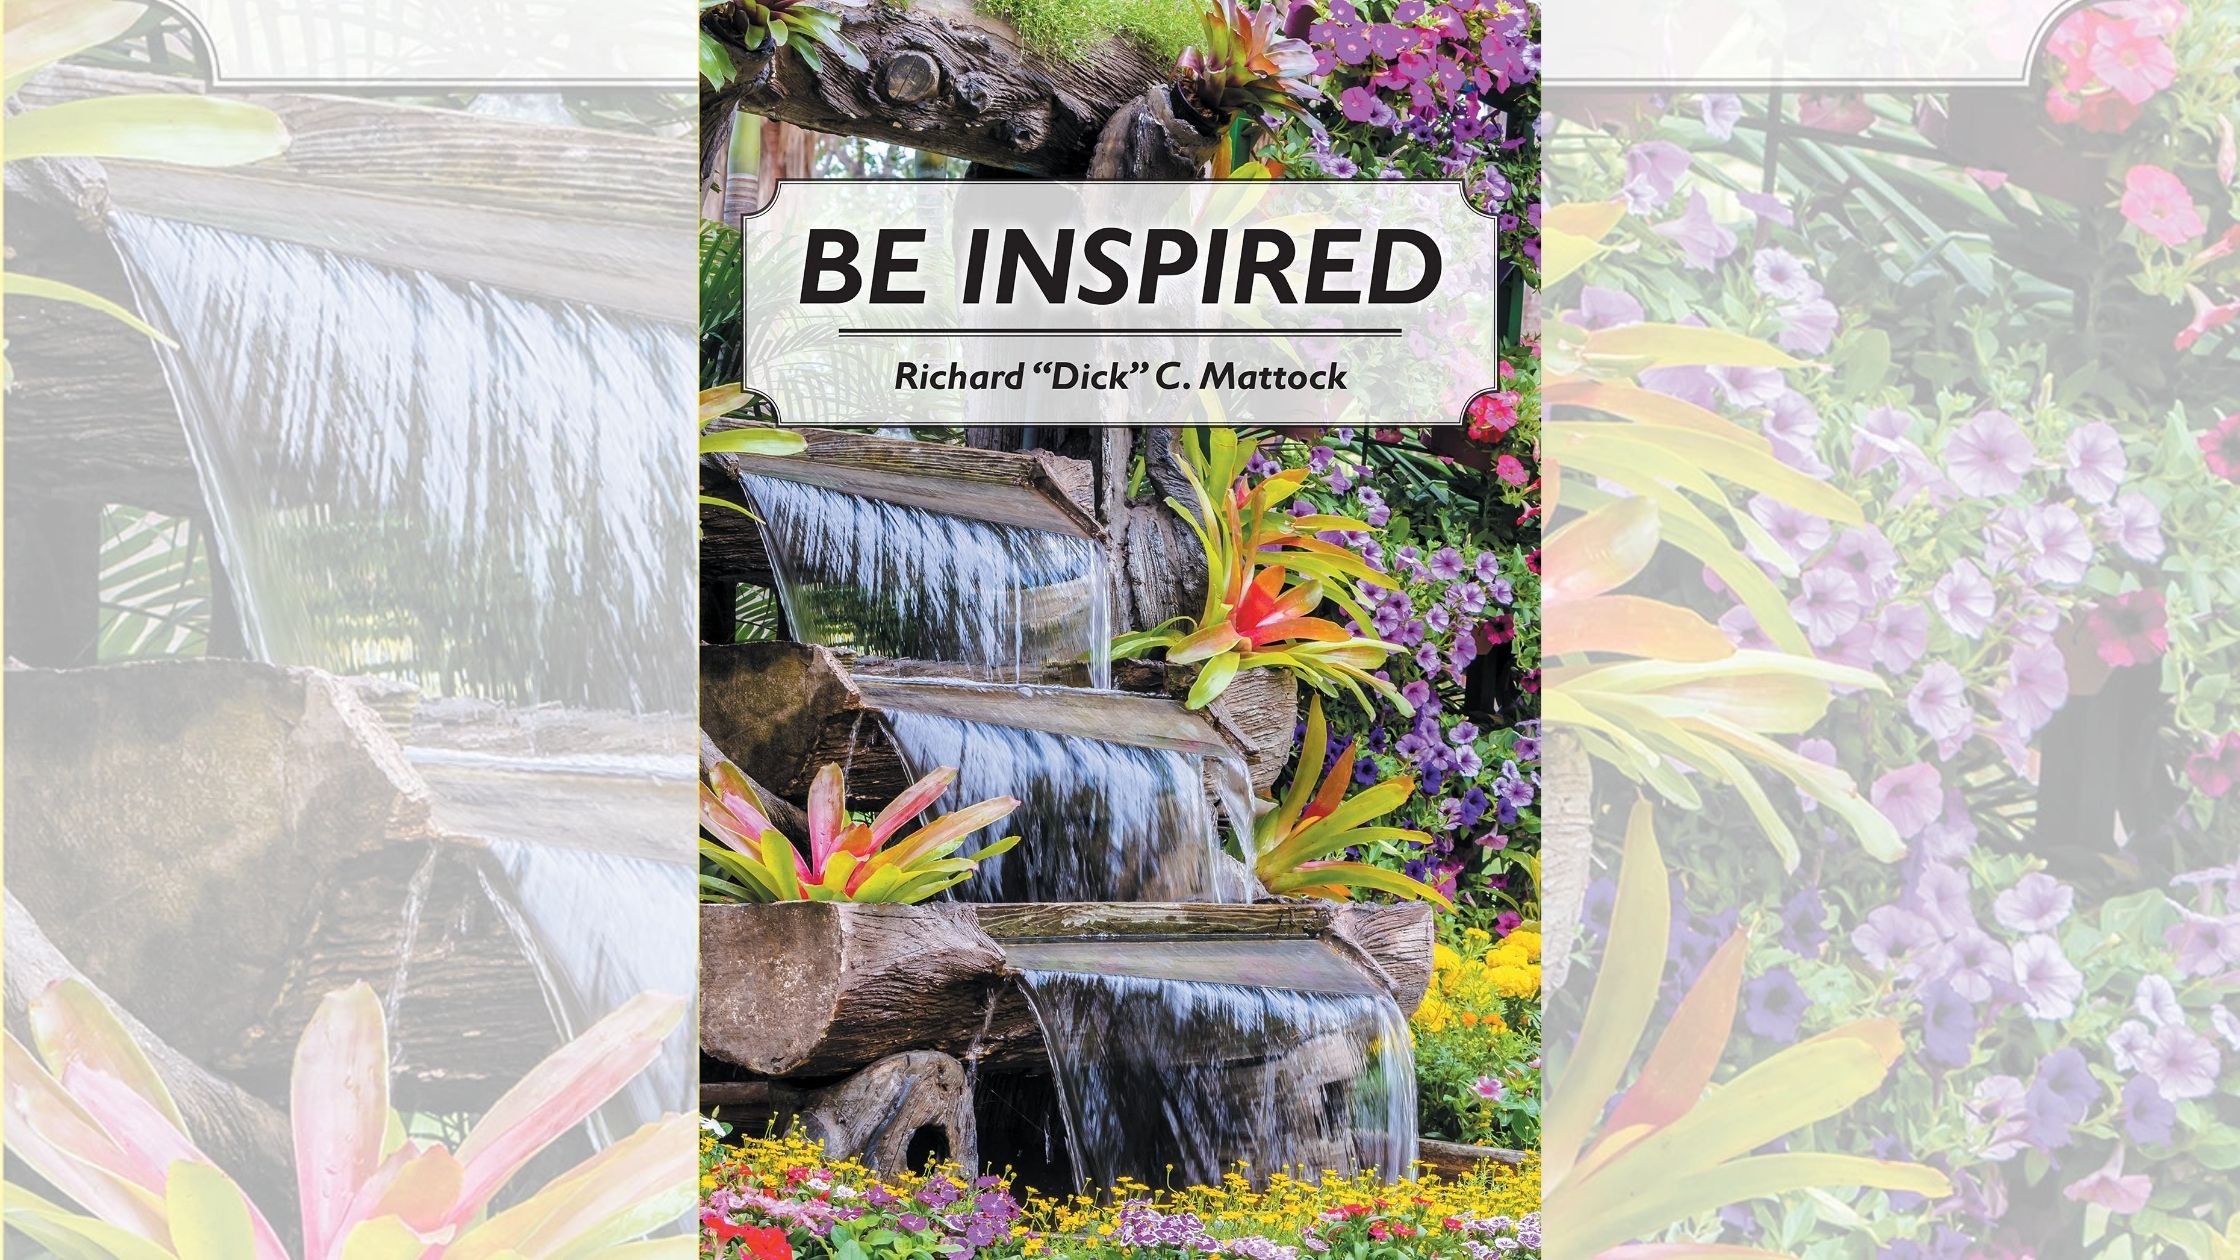 Richard "Dick" C. Mattock’s newly released “Be Inspired” is a thoughtful collection of poetry that addresses a variety of occasions